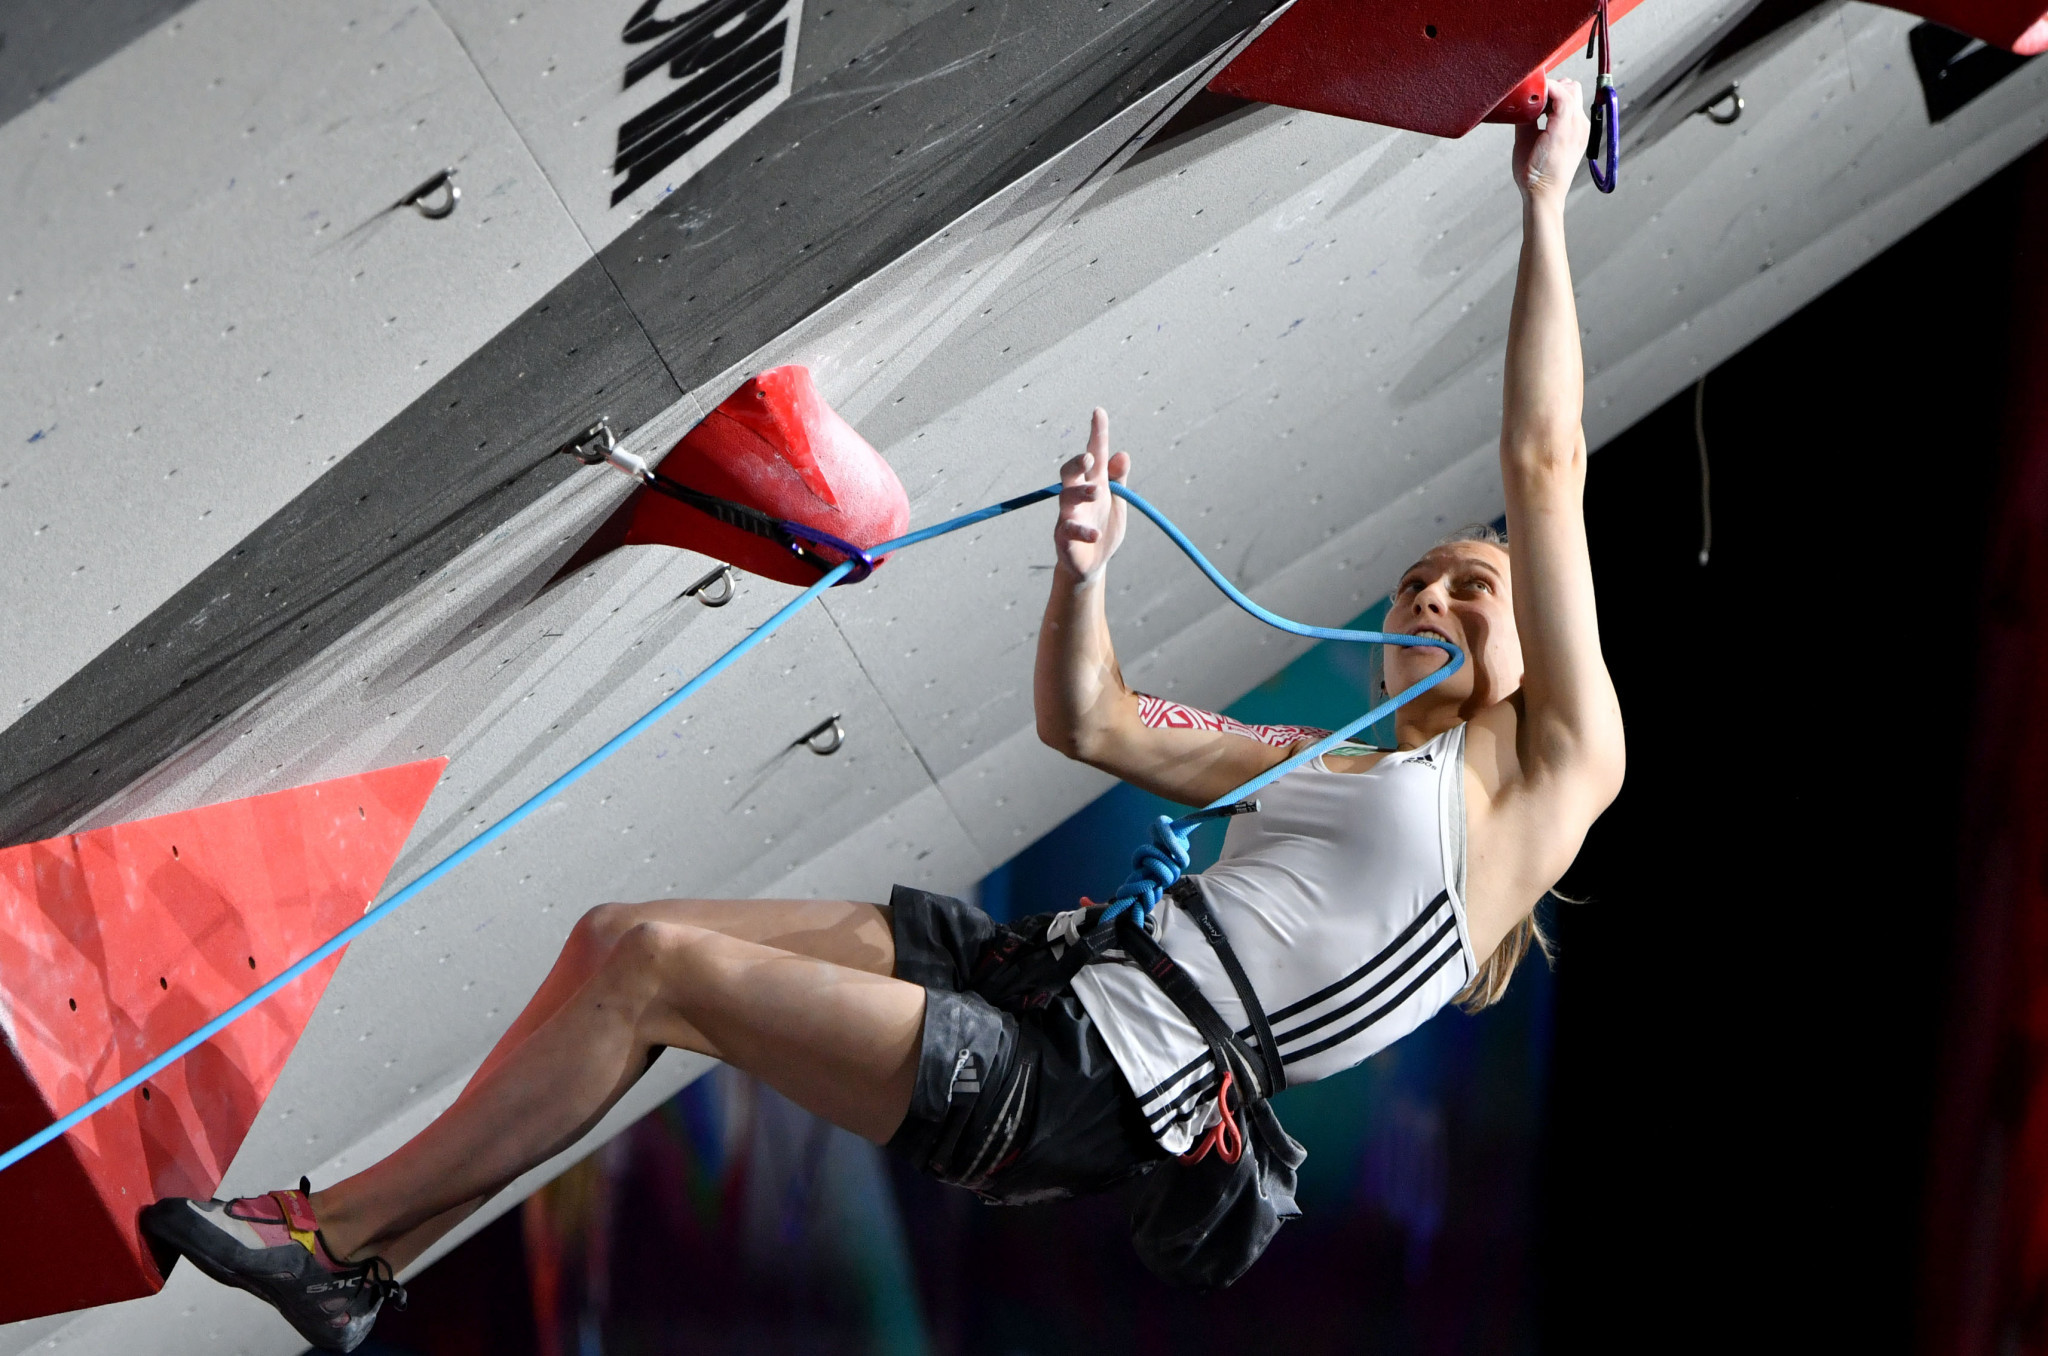 Janja Garnbret and Jakob Schubert wrapped up the overall lead titles at the International Federation of Sport Climbing World Cup in Wujiang ©Getty Images